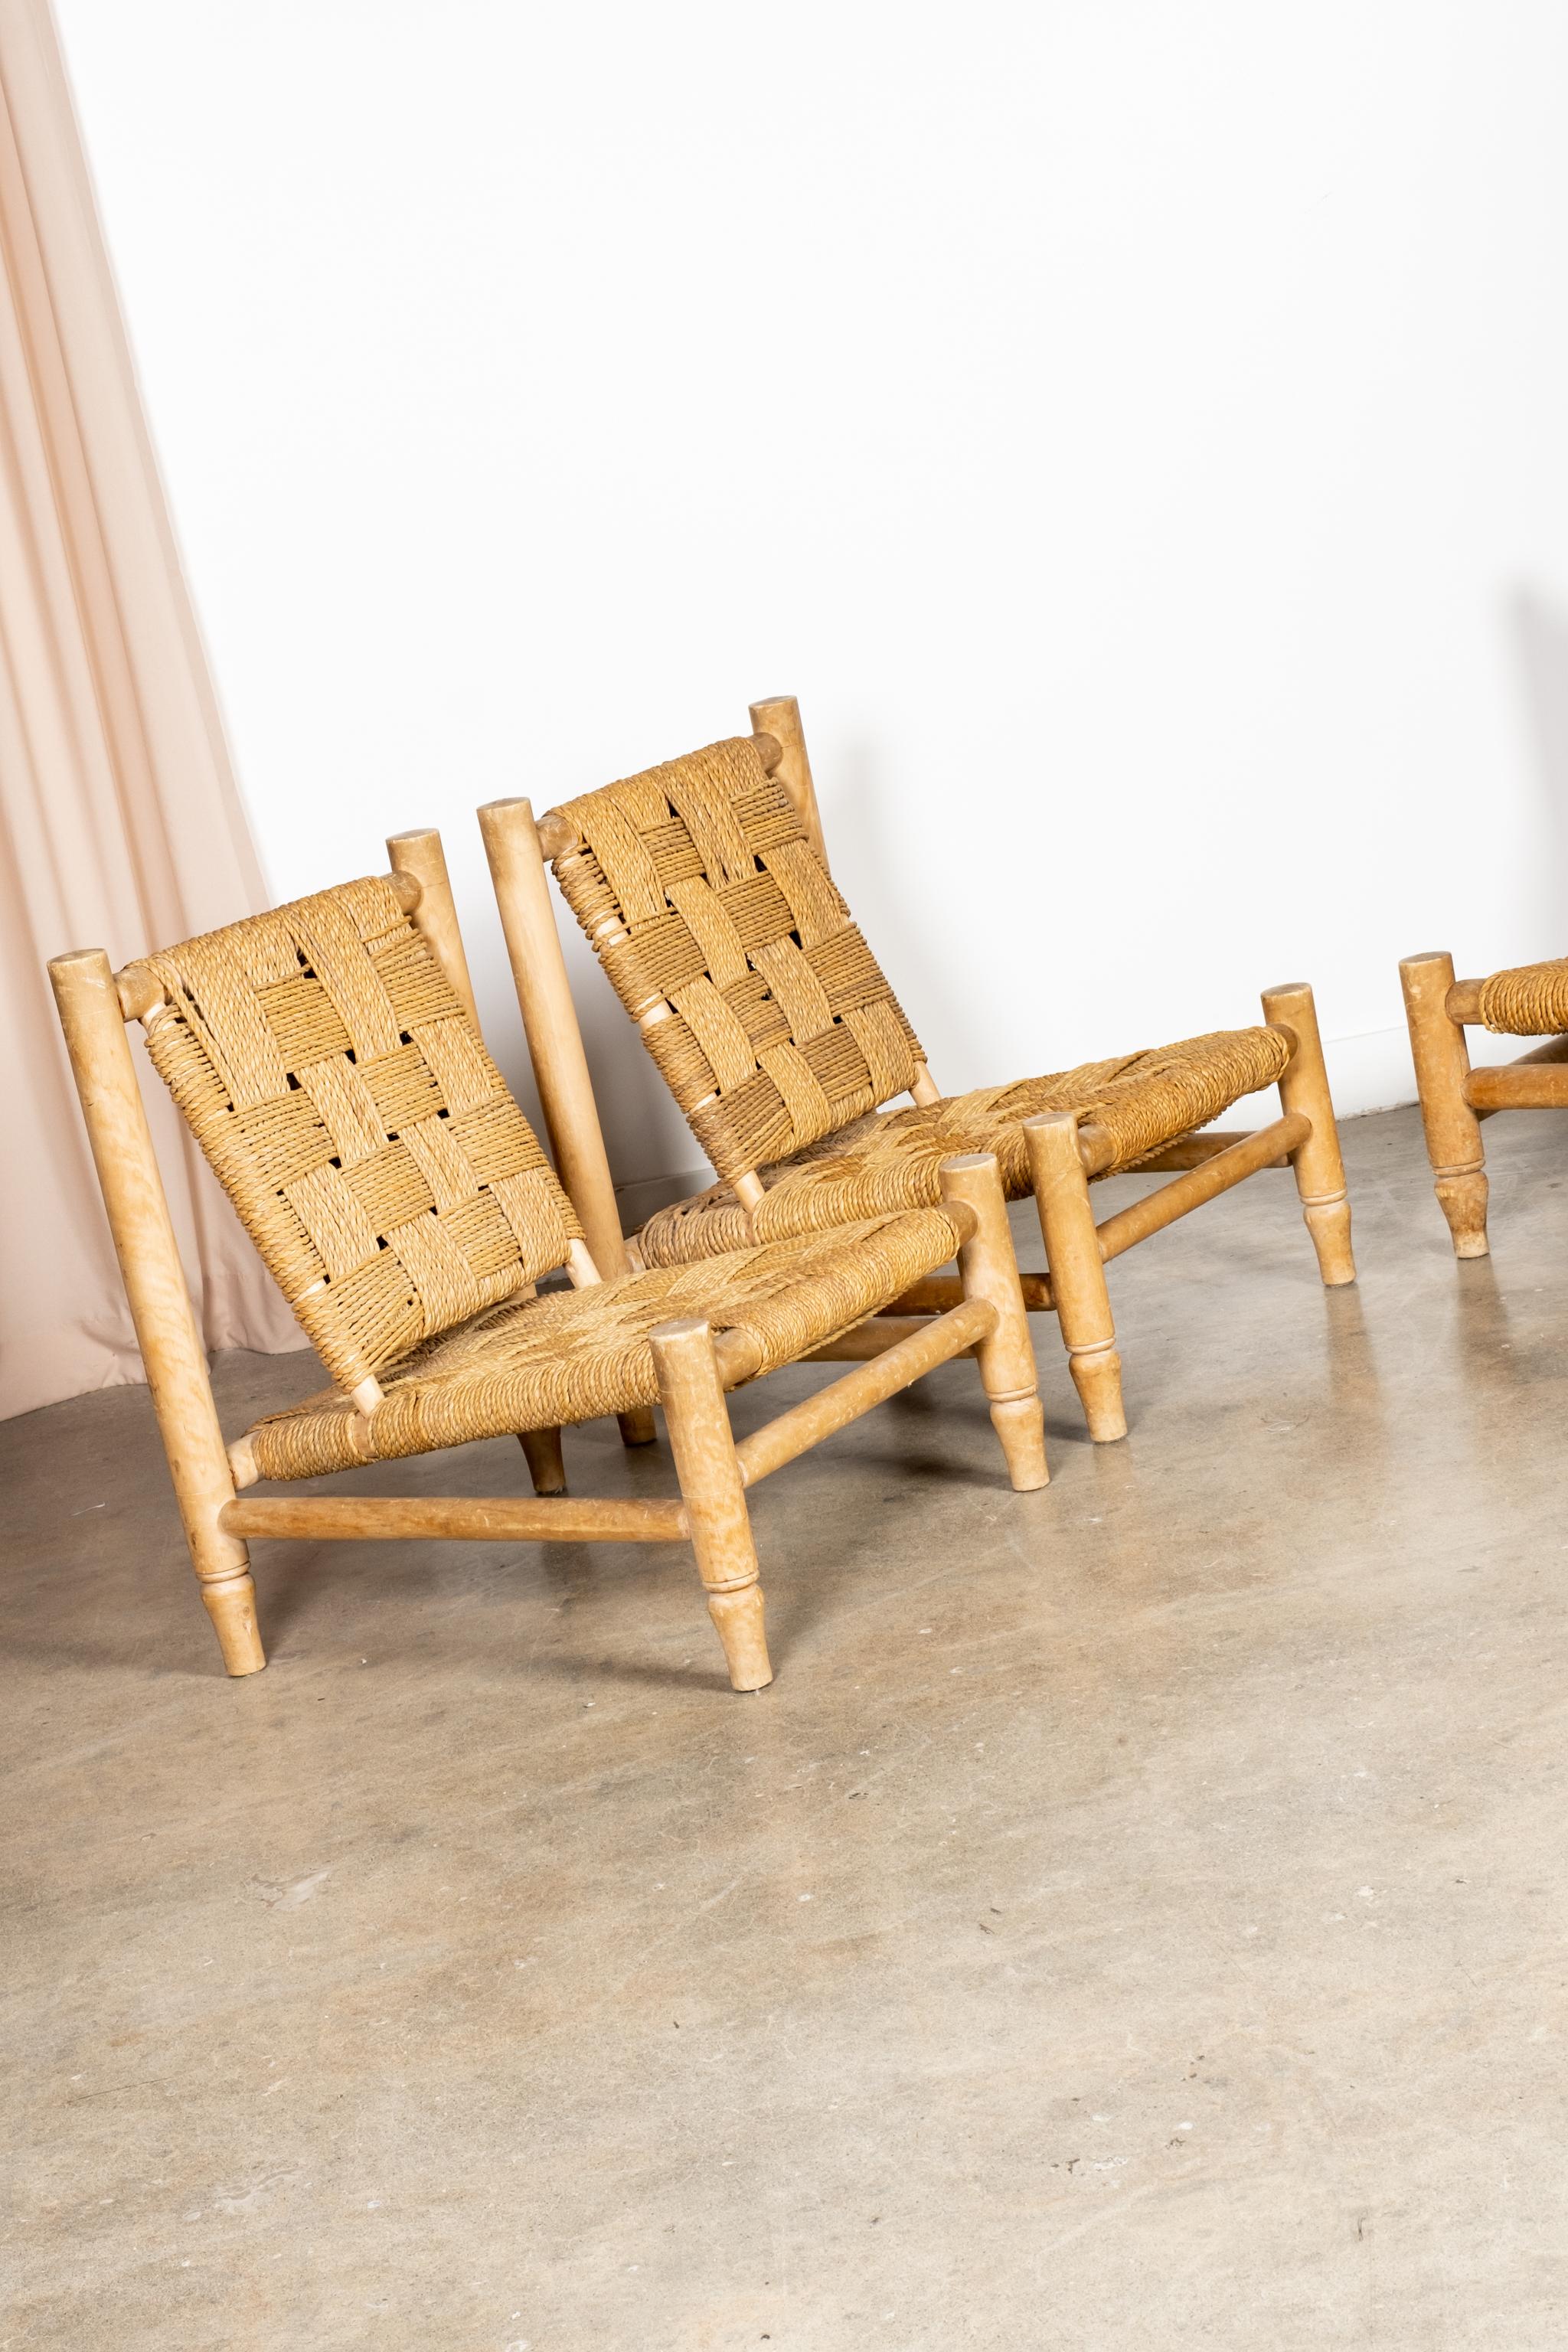 Pair of 1950s lounge chairs designed by French Modernist duo Adrian Audoux and Frida Minet. The primitive hand-turned beech frame clad in Original woven Abaca rope, references coastal living, while celebrating its humble materials - a hallmark of